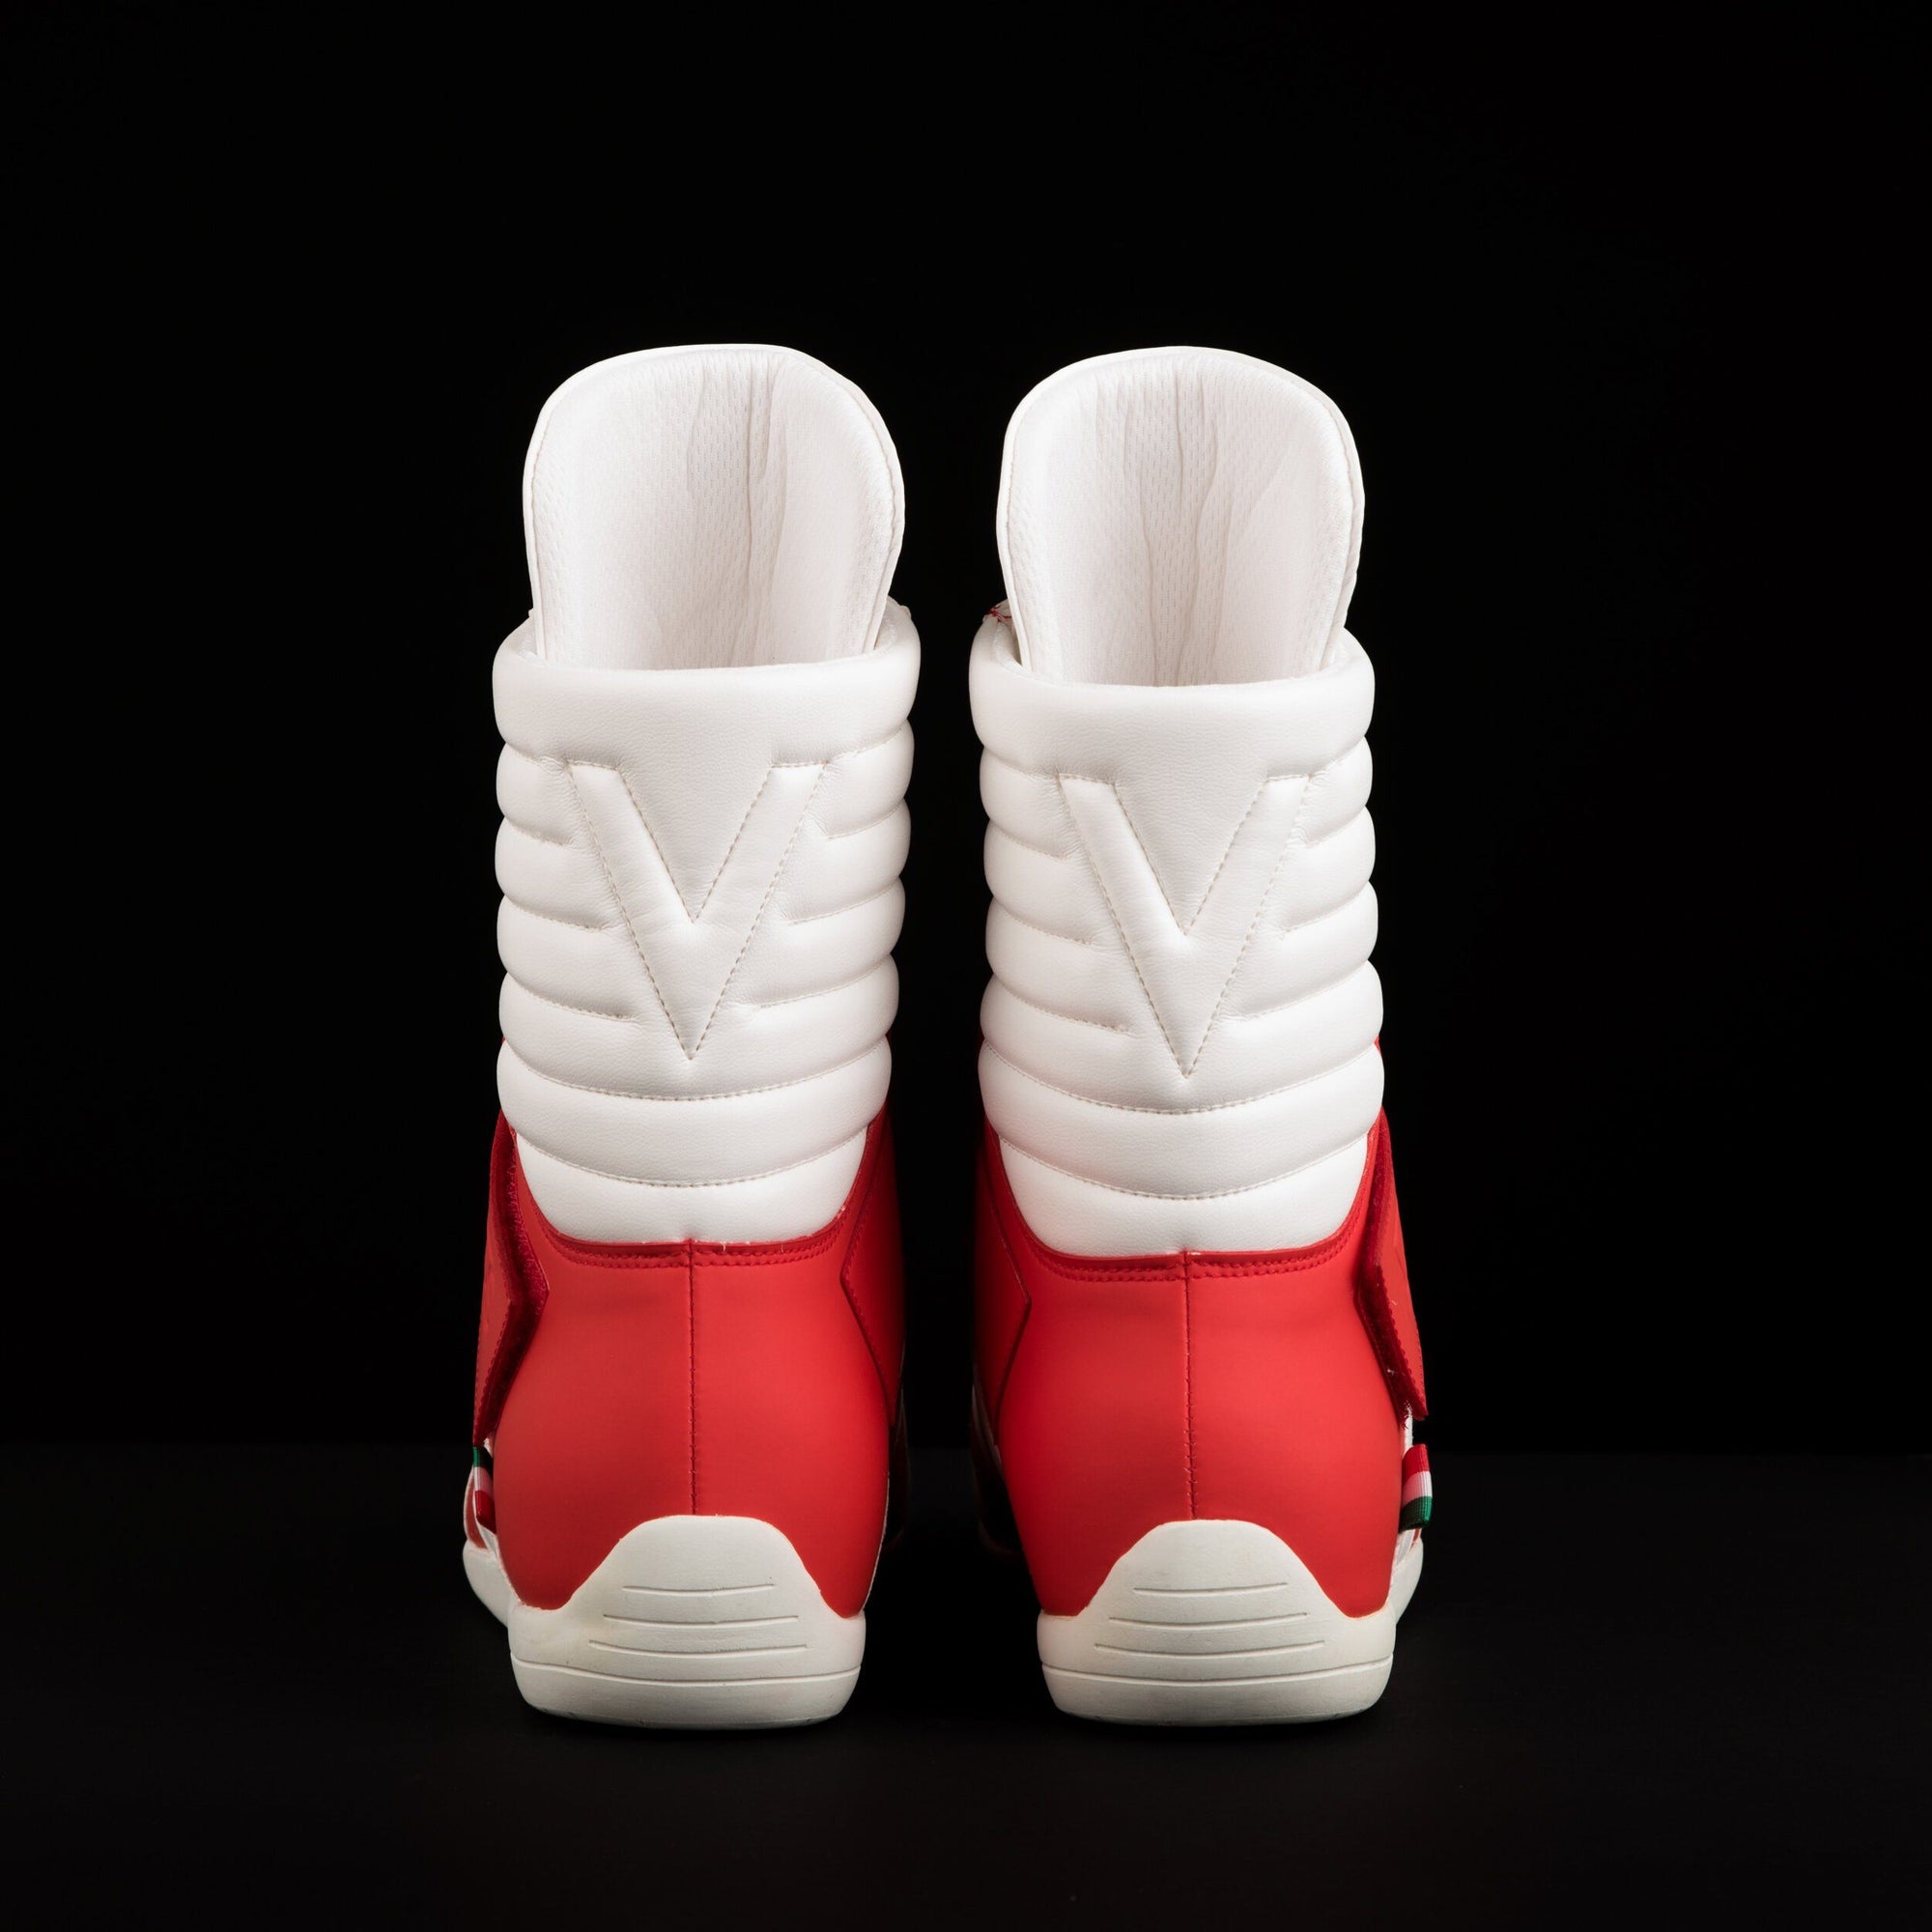 red white high top boxing shoes freee shipping unisex design